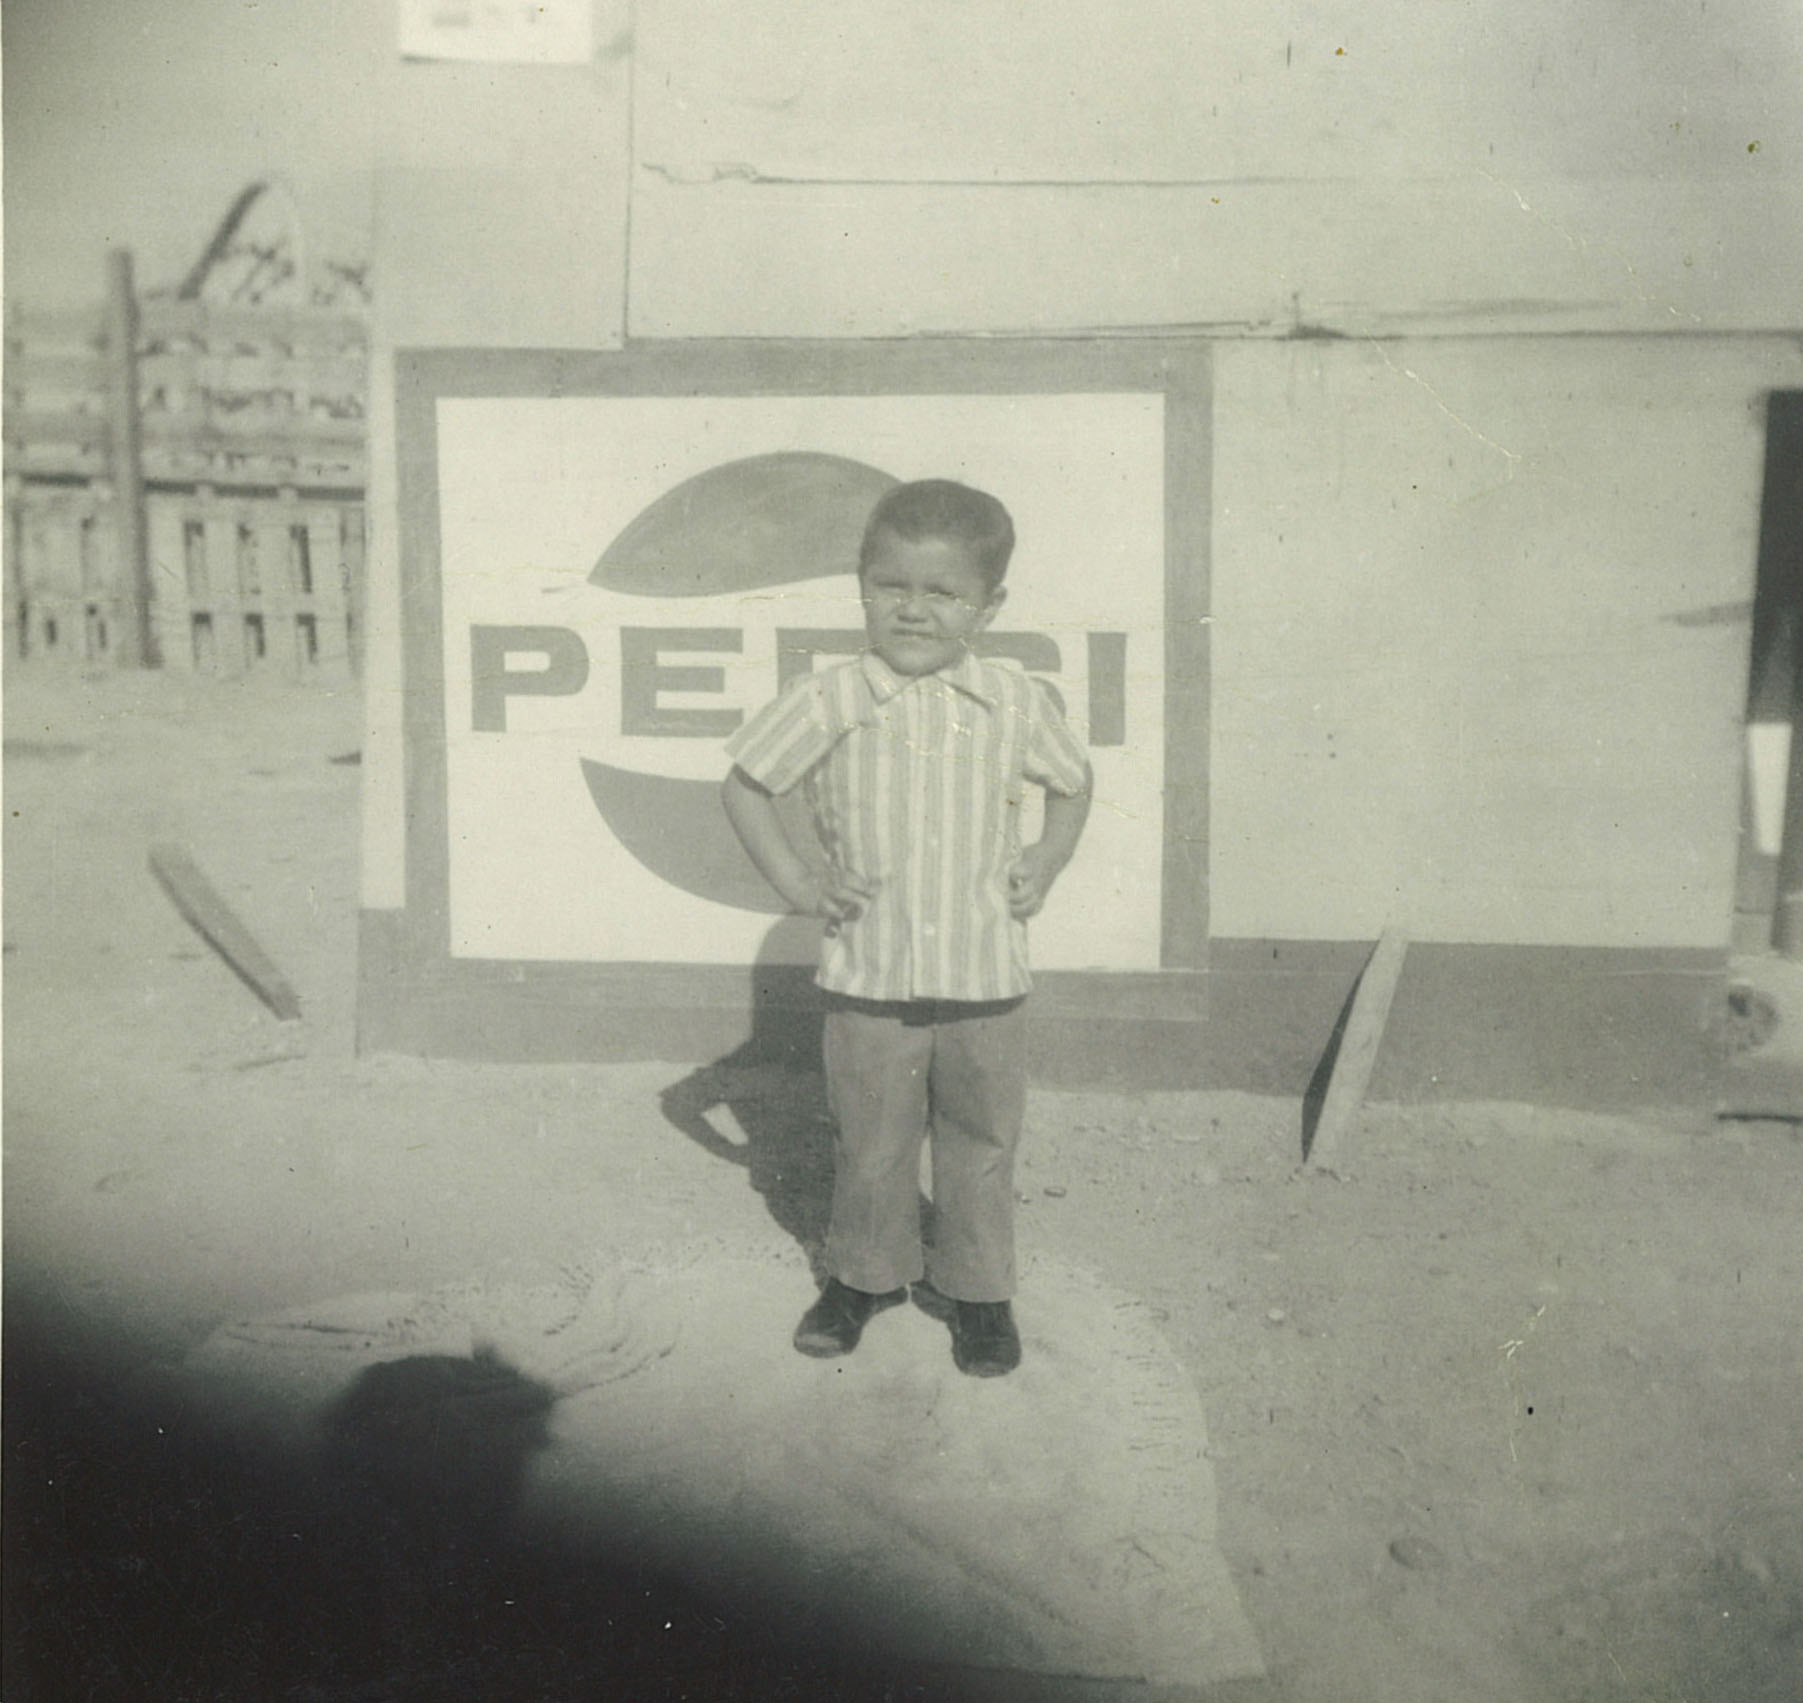 A black and white photo of a 5-year-old boy in front of an old Pepsi logo. The boy stands with a big smile and his hands on his hips.